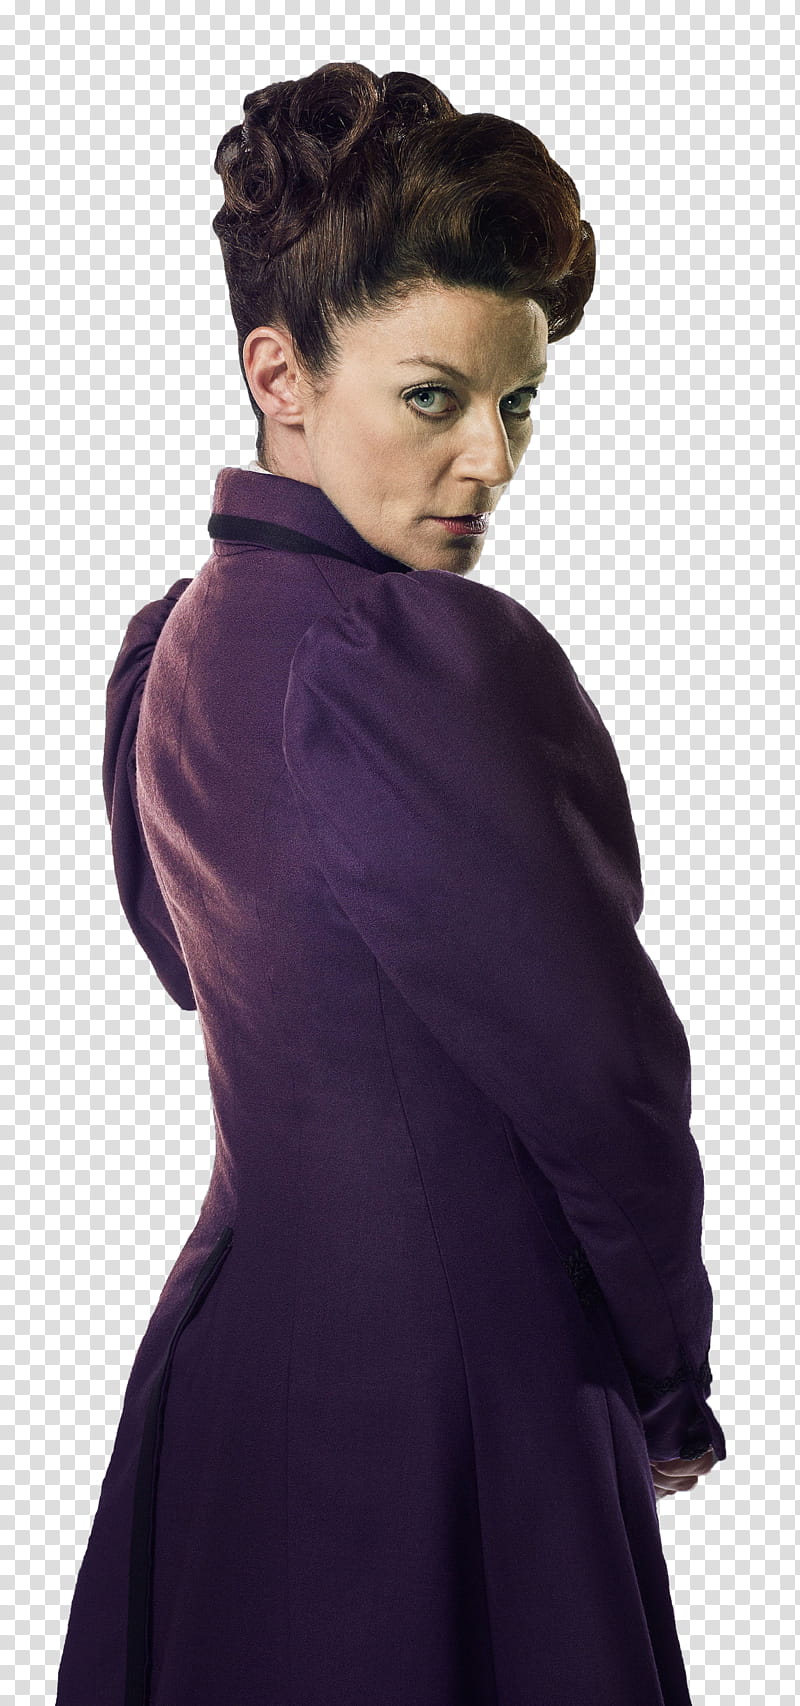 Doctor Who Season , woman wearing purple dress transparent background PNG clipart